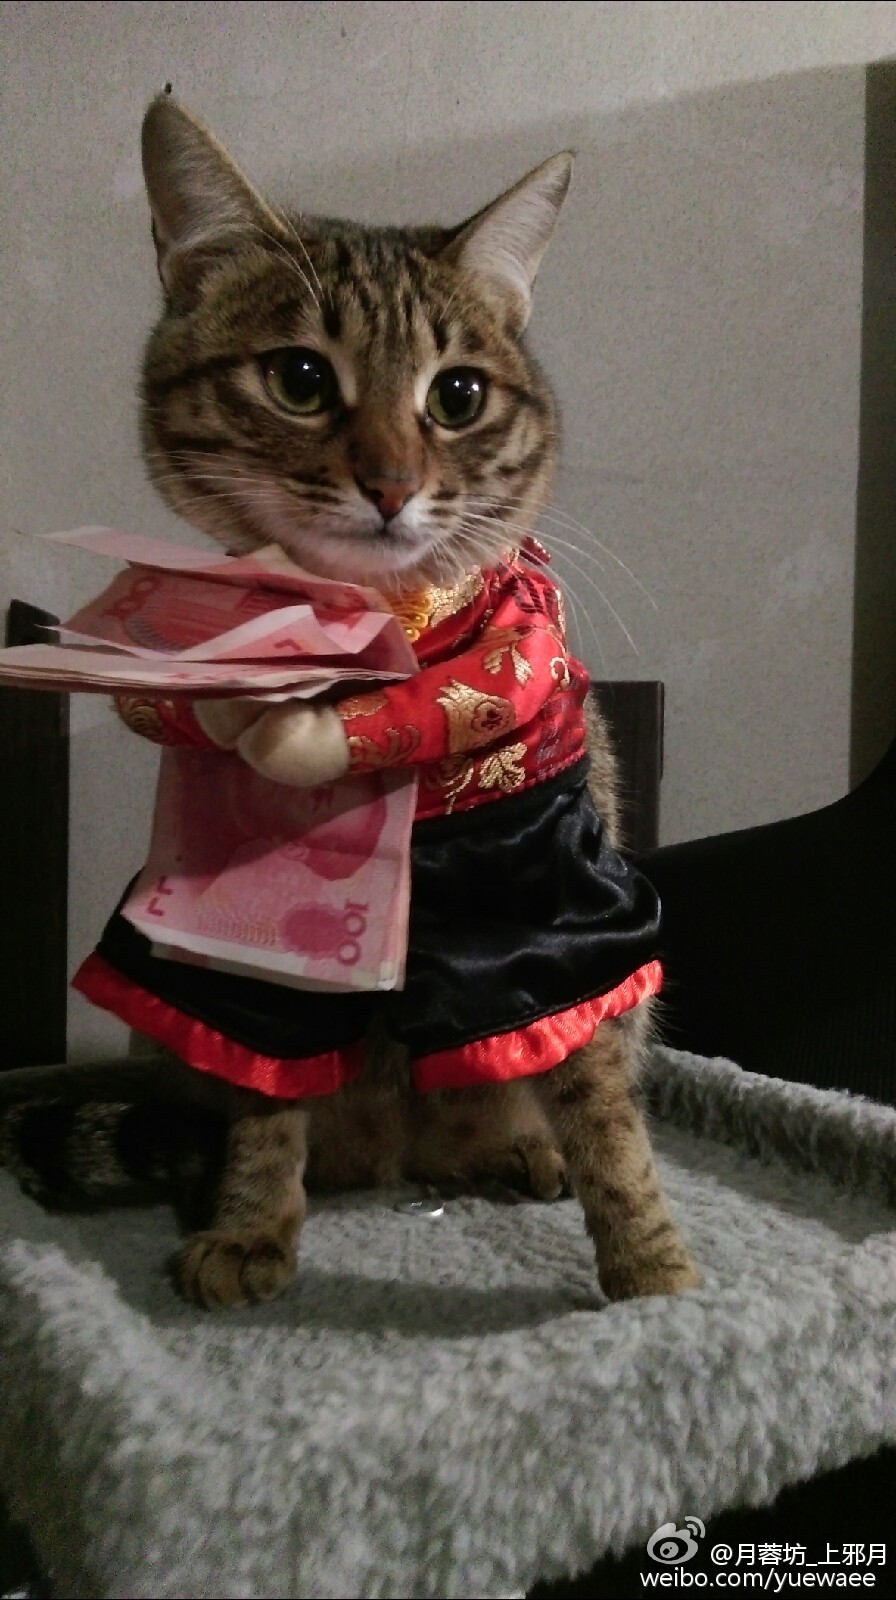 kitty cat LOL funny cute china chinese new year chinese culture weibo